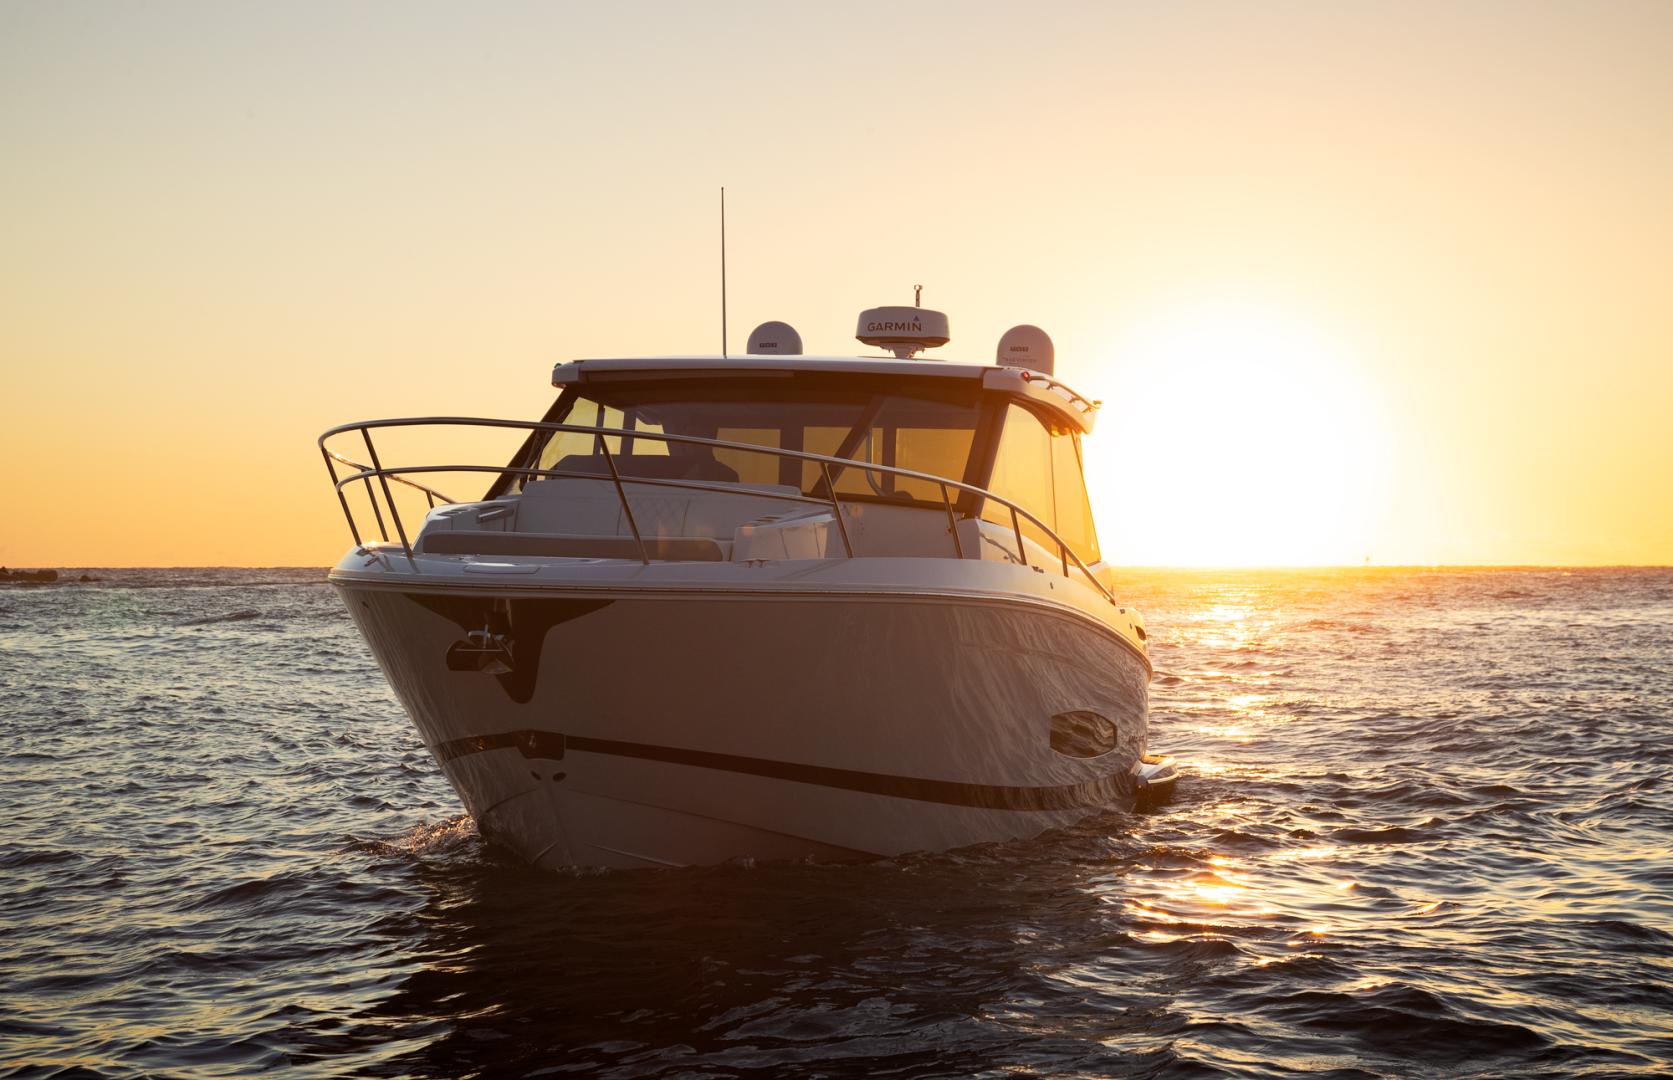 Regal Marine Industries unveils two all-new models live